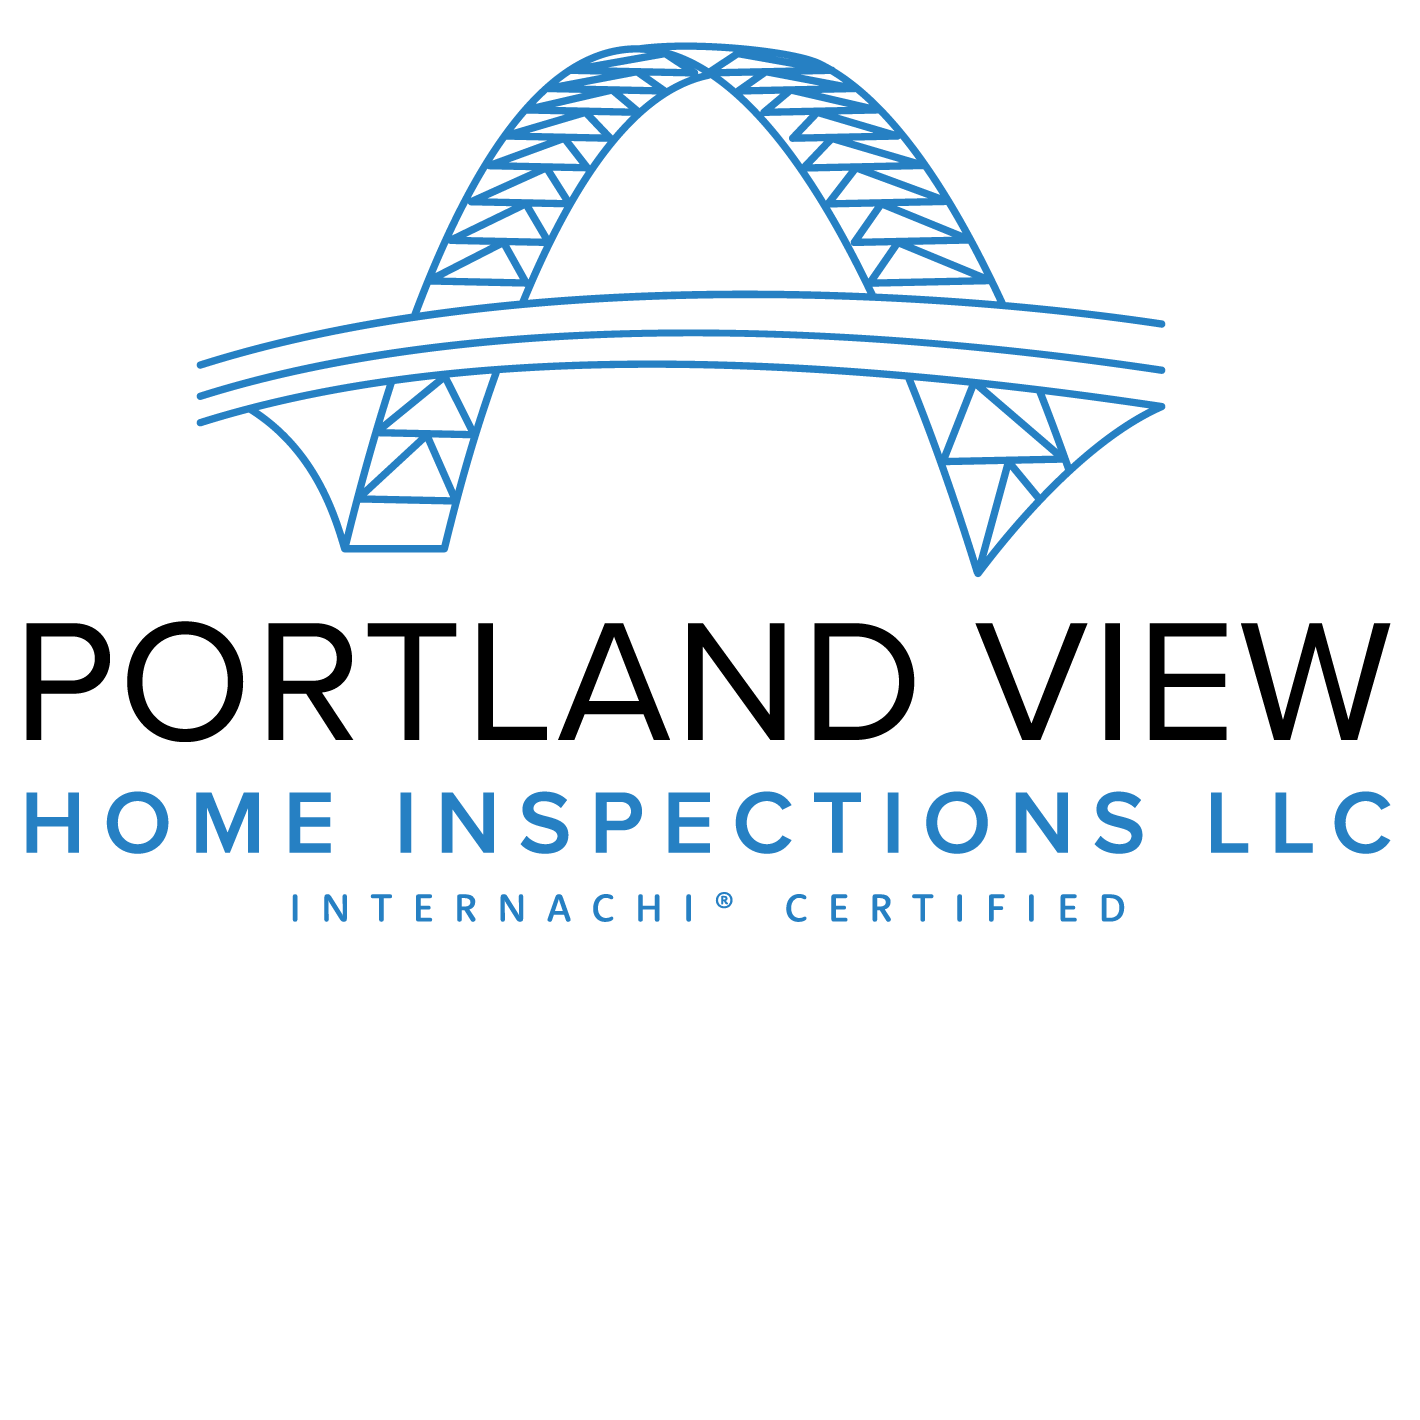 Portland View Home Inspections